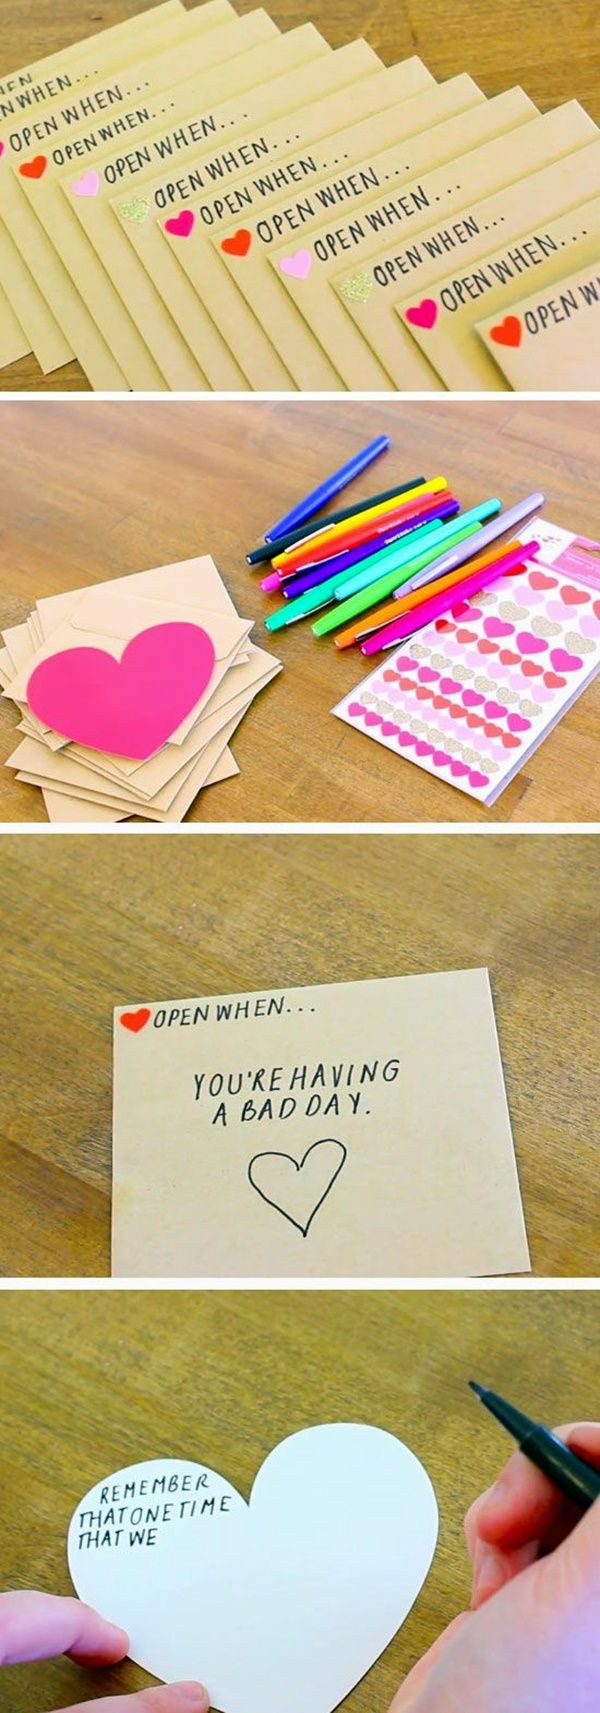 Cute Valentines Day Gift Ideas For Him
 101 Homemade Valentines Day Ideas for Him that re really